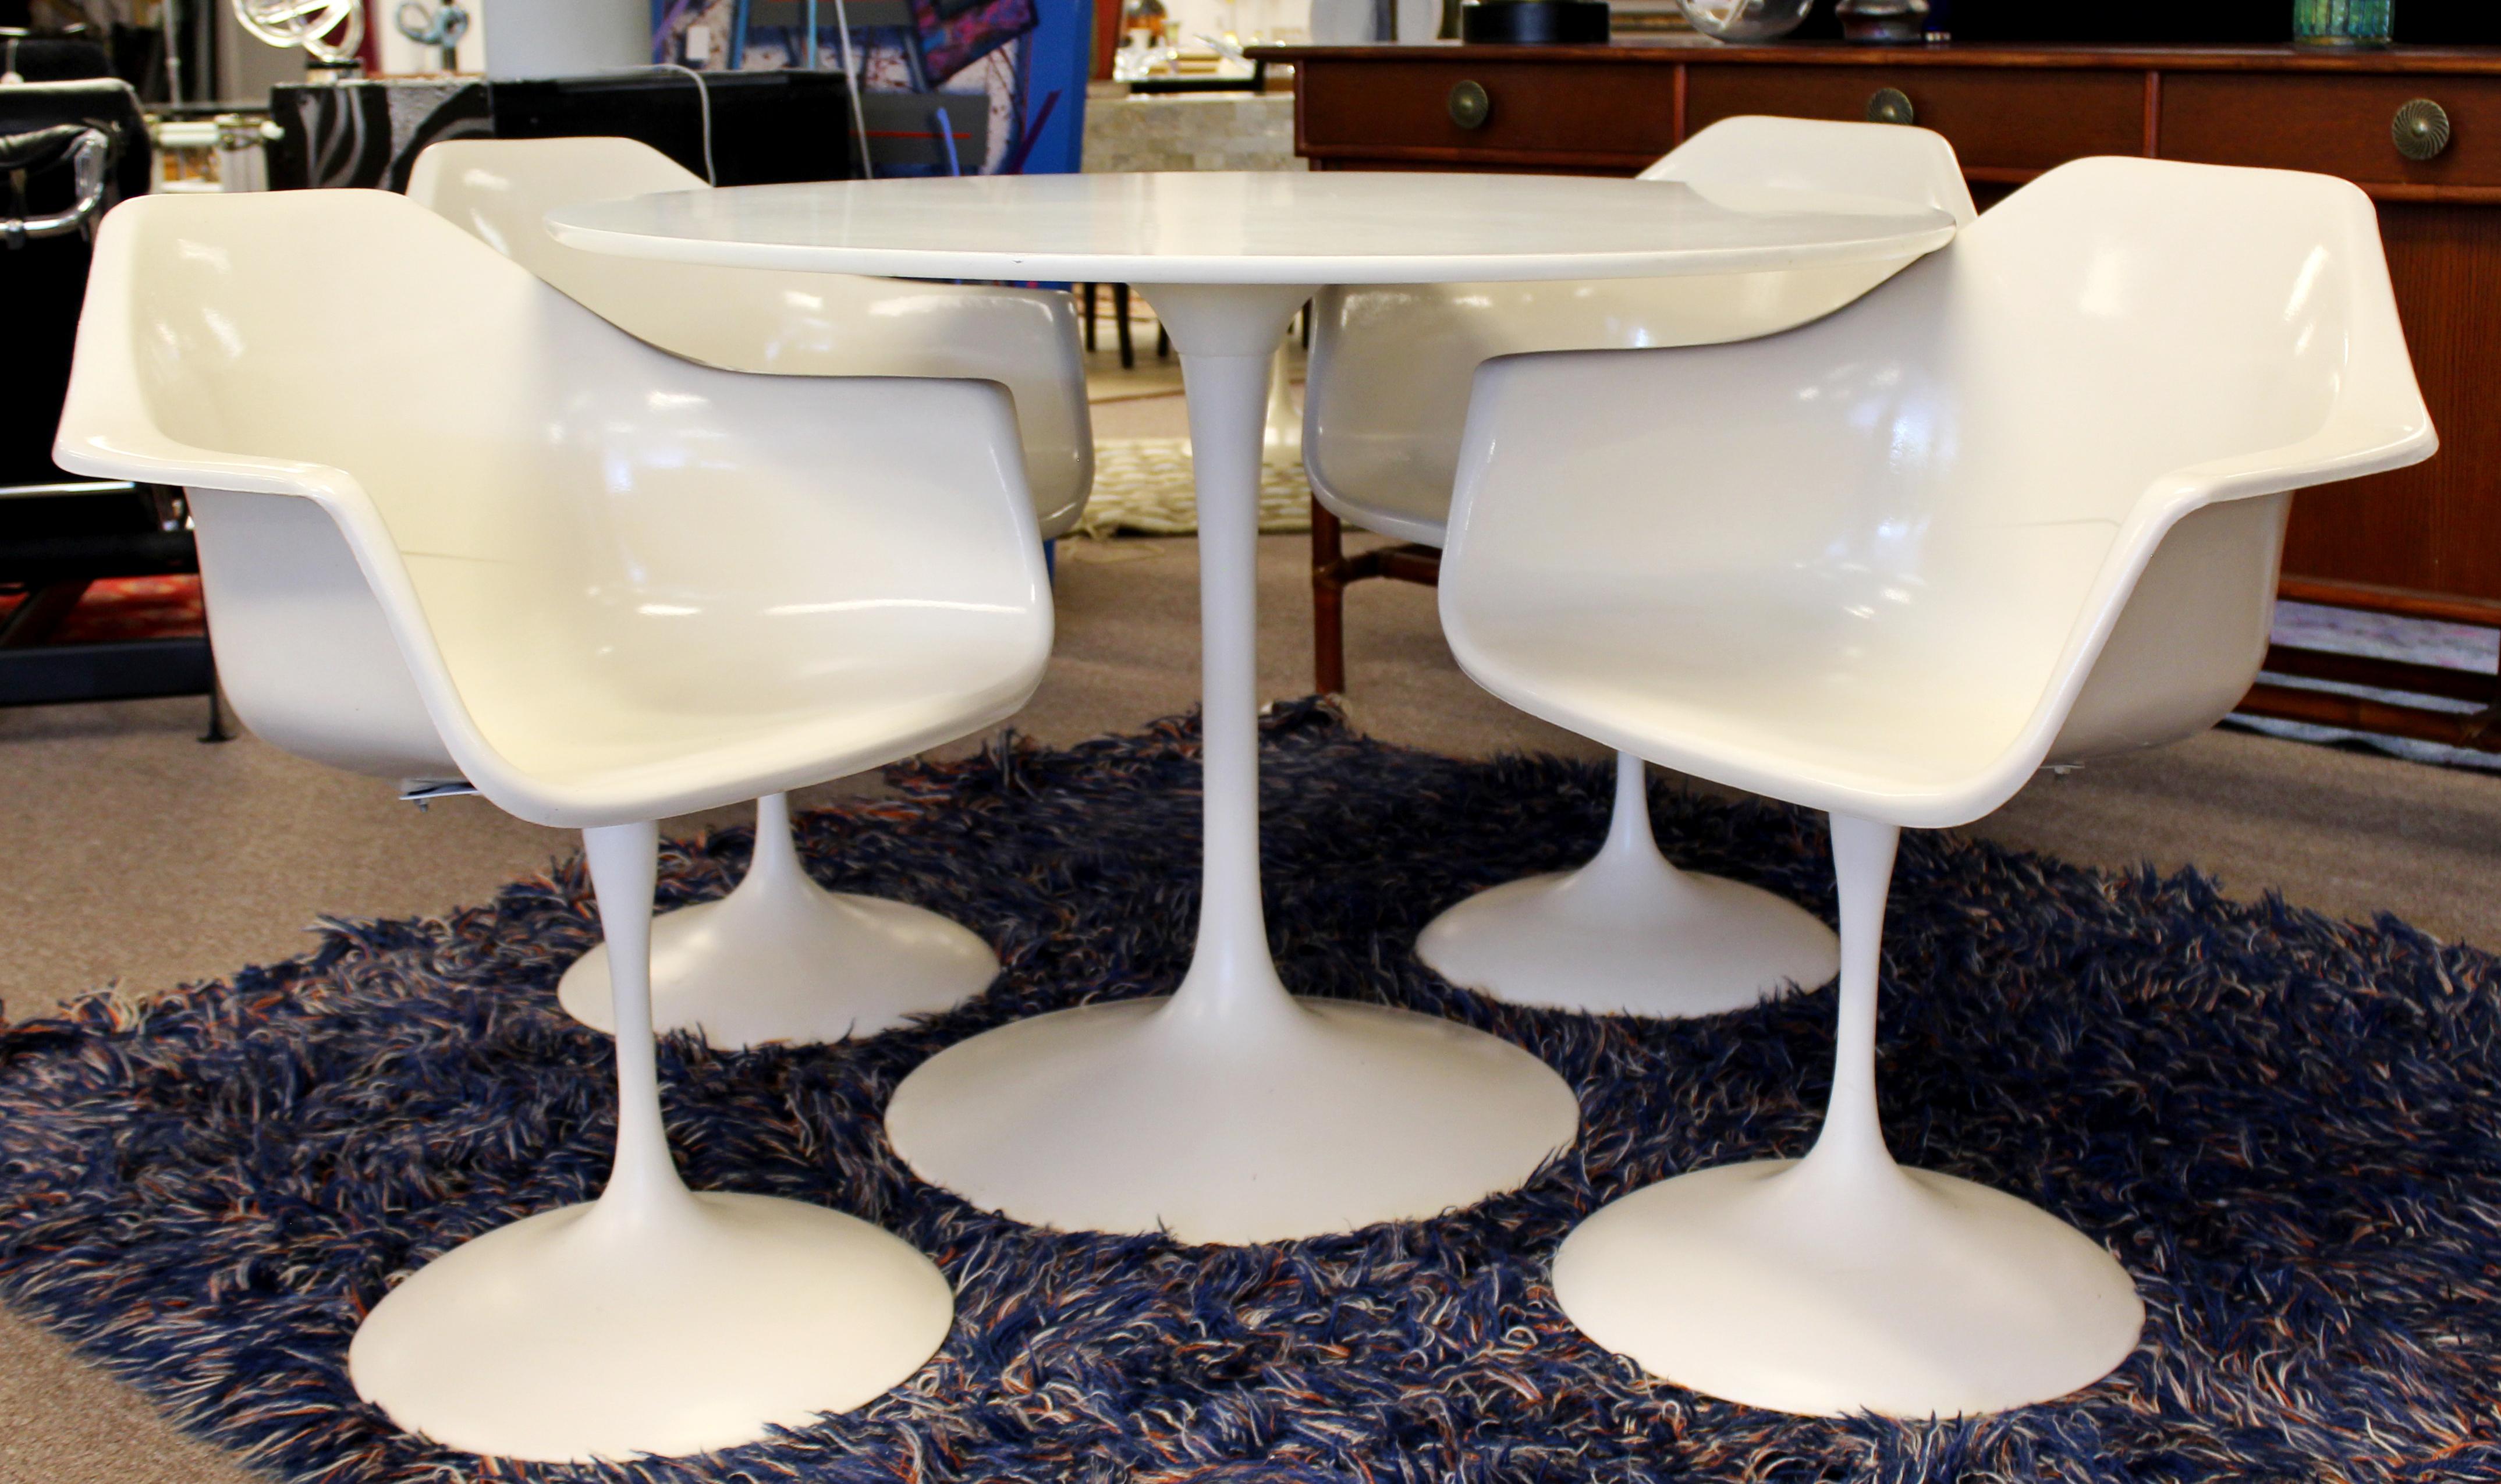 For your consideration is a spectacular, Tulip dining dinette set, including table and four dining armchairs, by Burke, circa 1960s. In good vintage condition. The dimensions of the table are 42